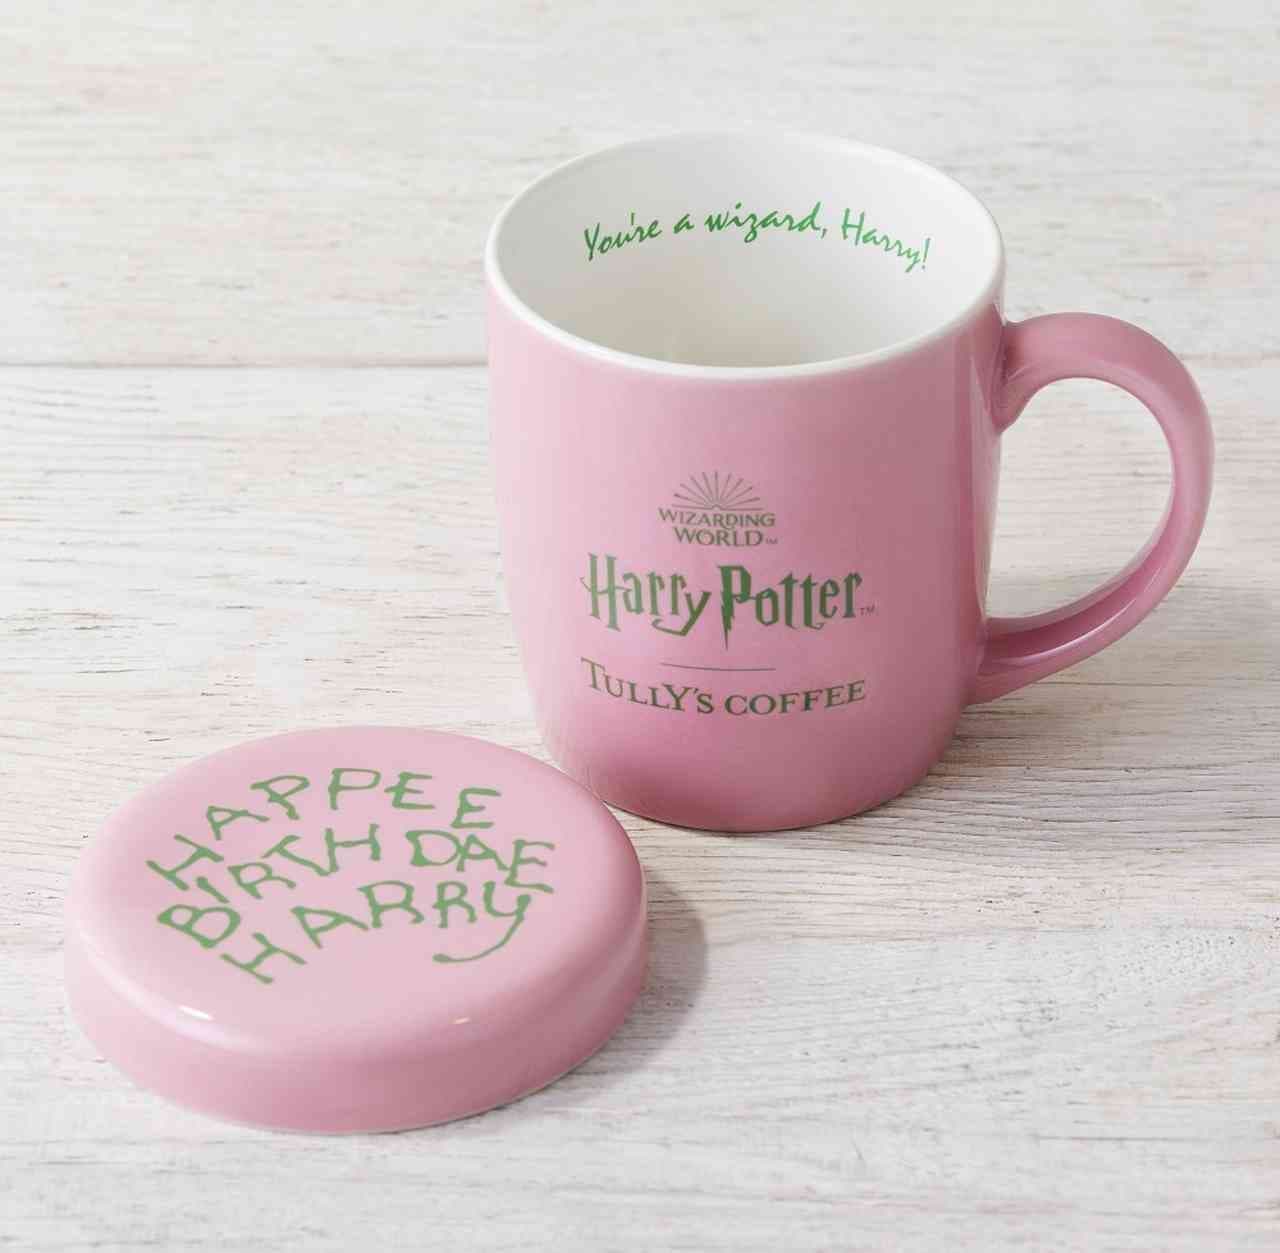 Tully's "Harry Potter" collaboration goods